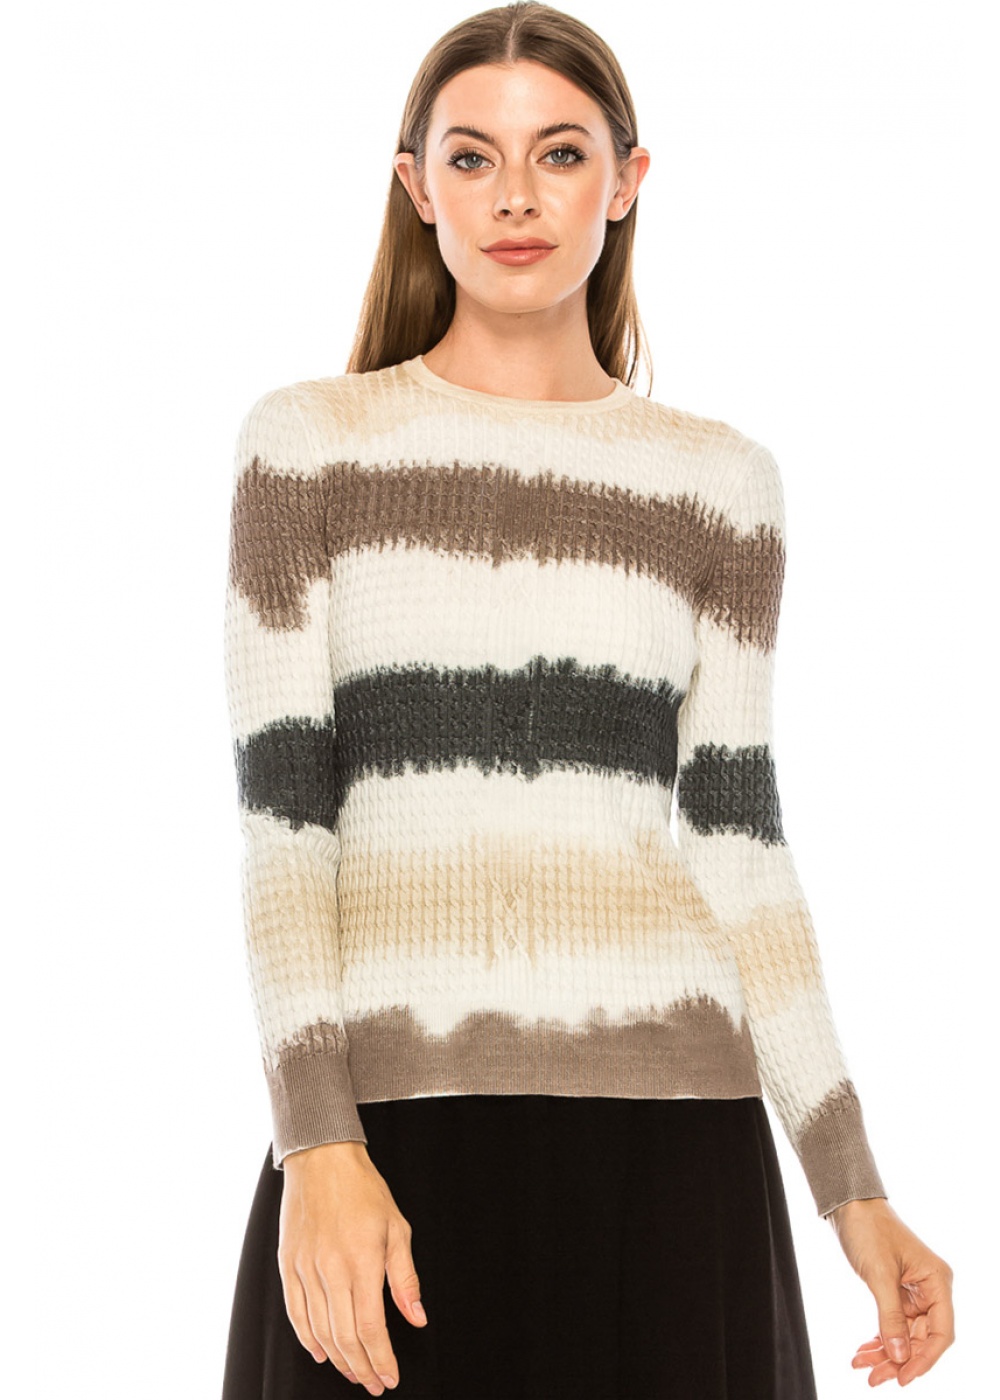 Creatively striped sweater in brown shades